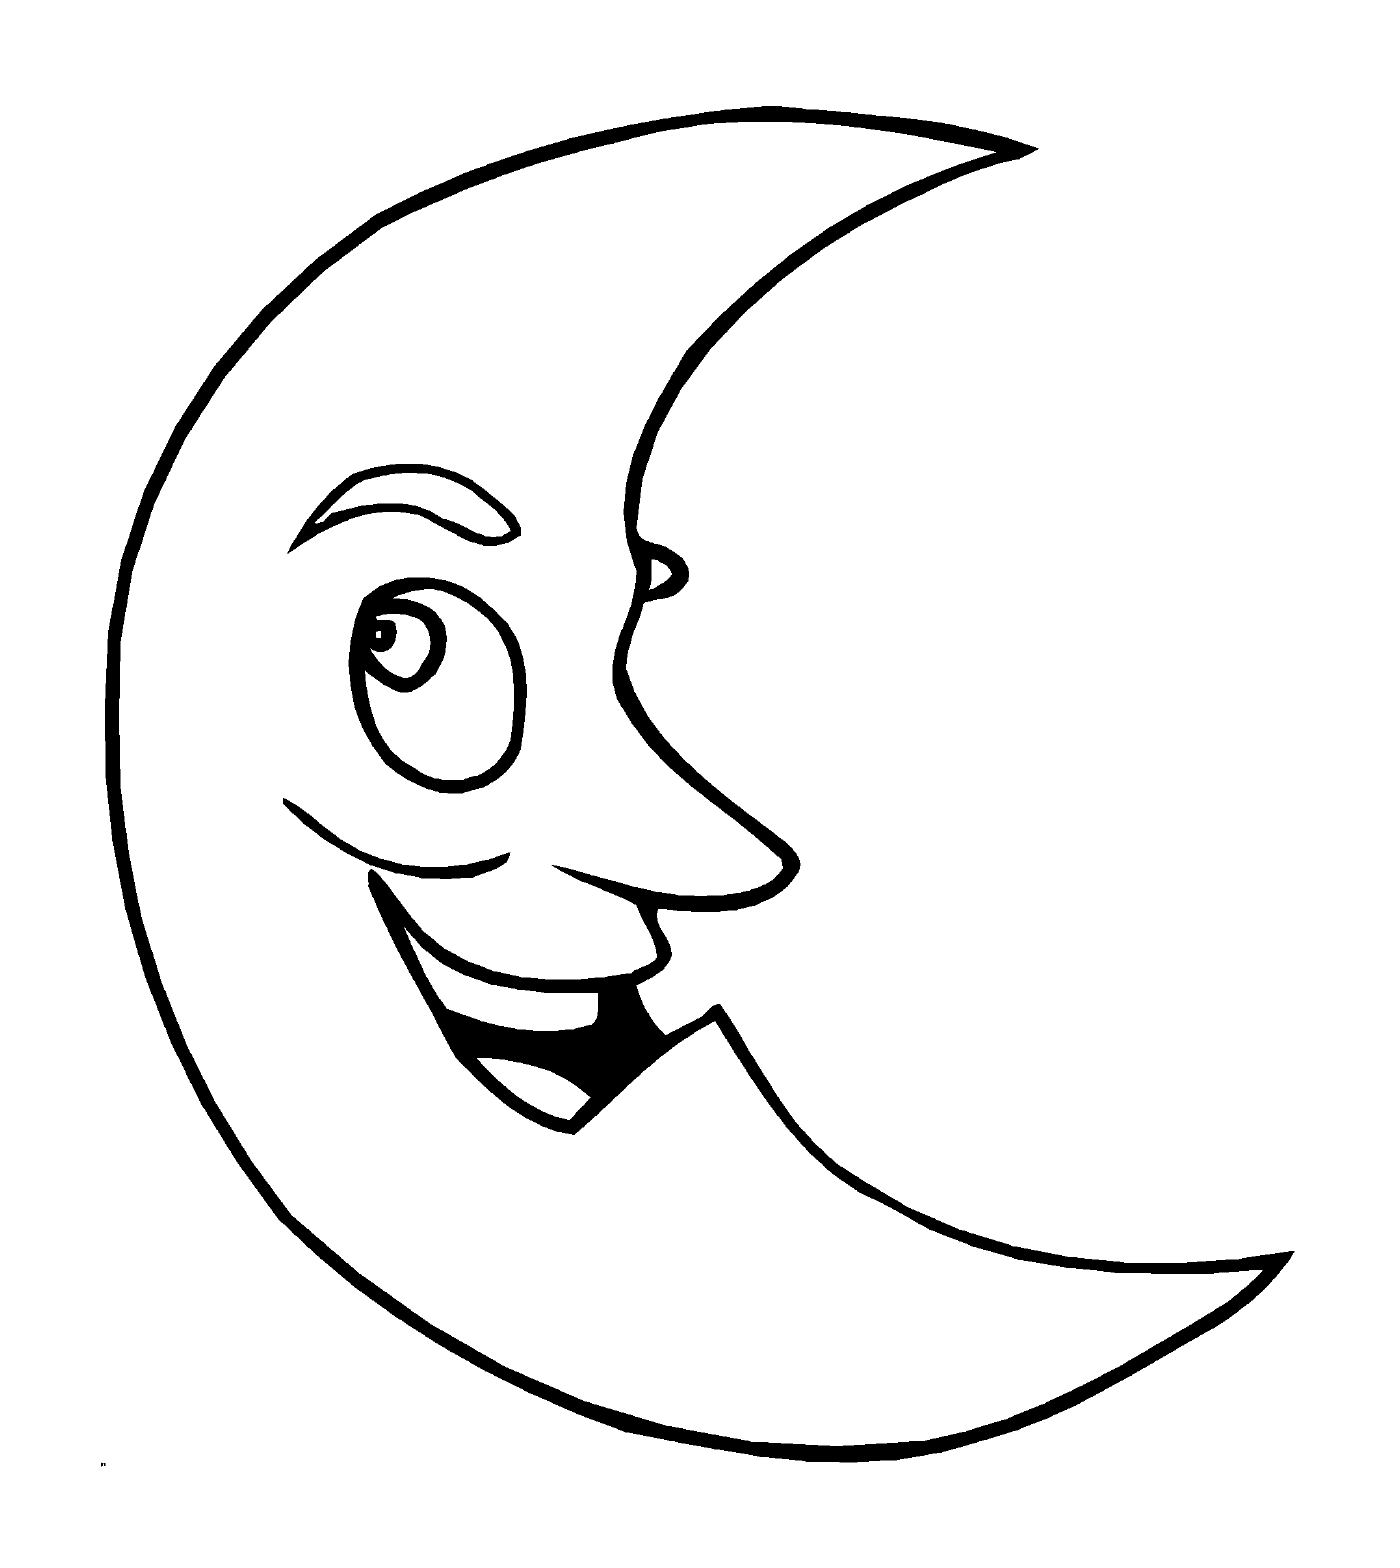  Moon with a smiling face 